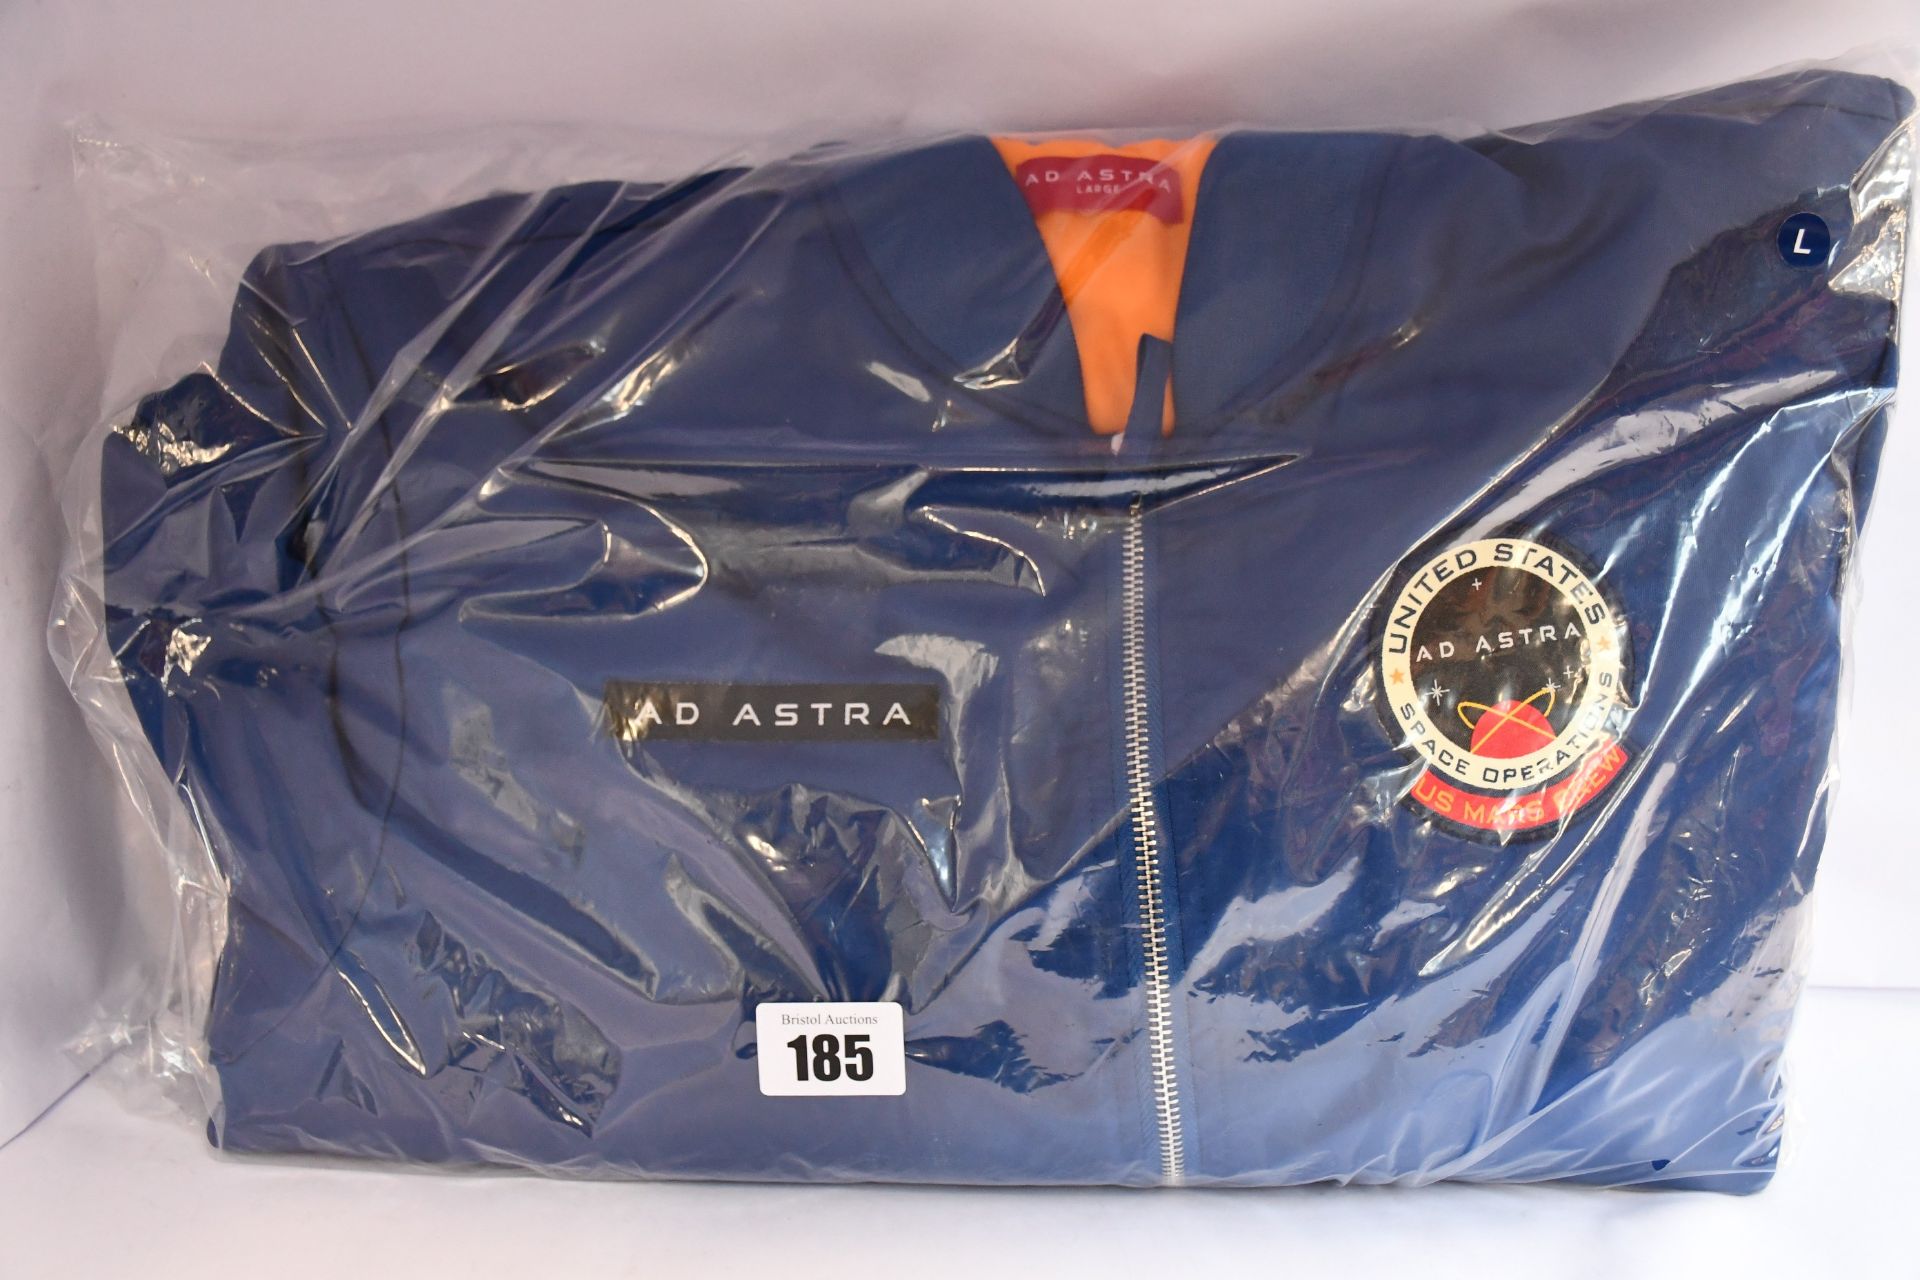 Three as new Ad Astra jackets (All L), replica/promotional jackets to tie in with the 2019 film.